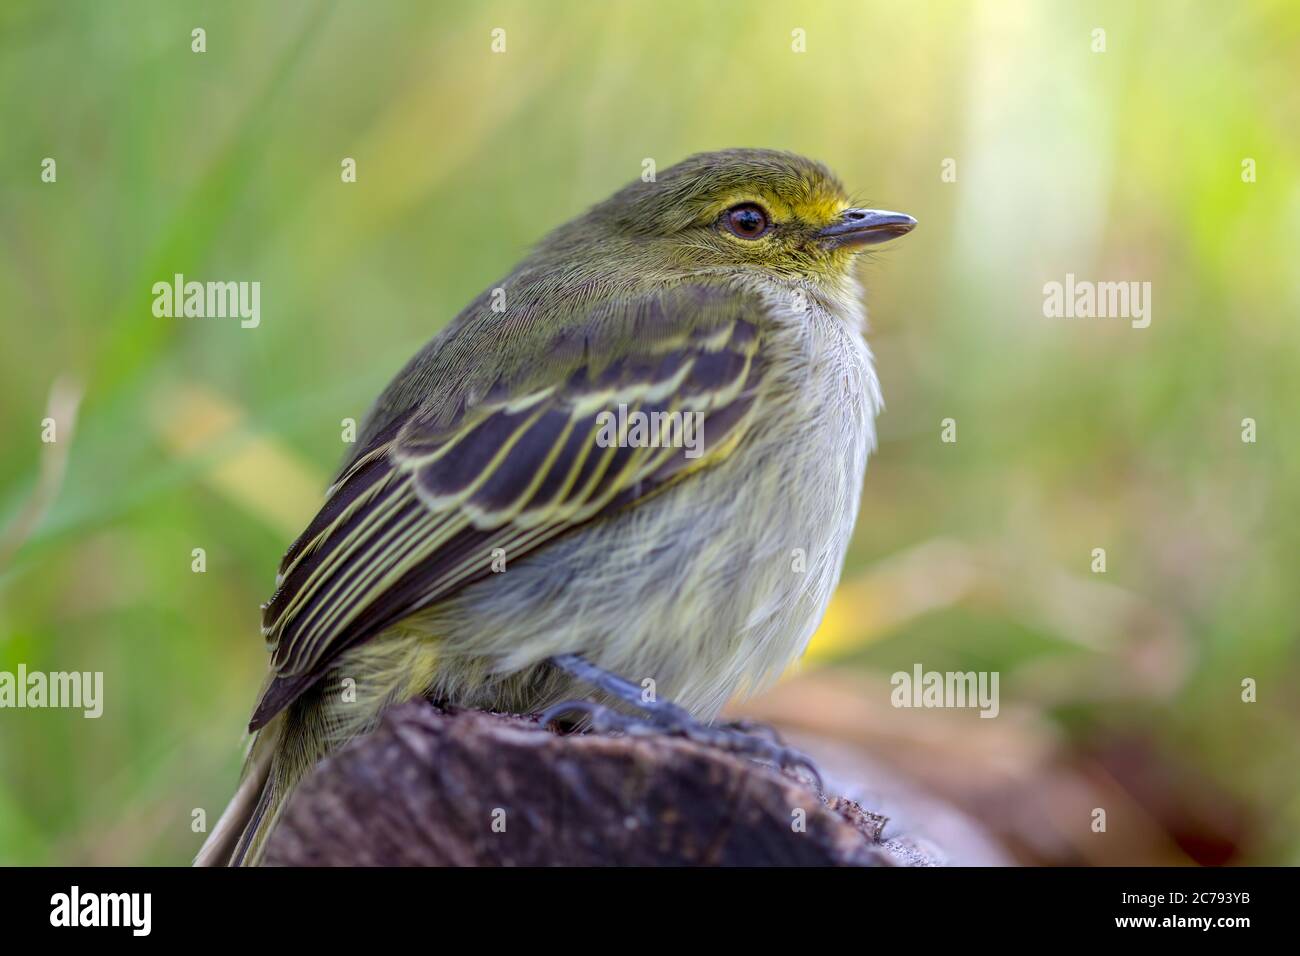 Macro photography of a little golden-faced tyrannulet bird, captured at highlands near the town of Villa de Leyva, in the Andean mountains of Colombia Stock Photo